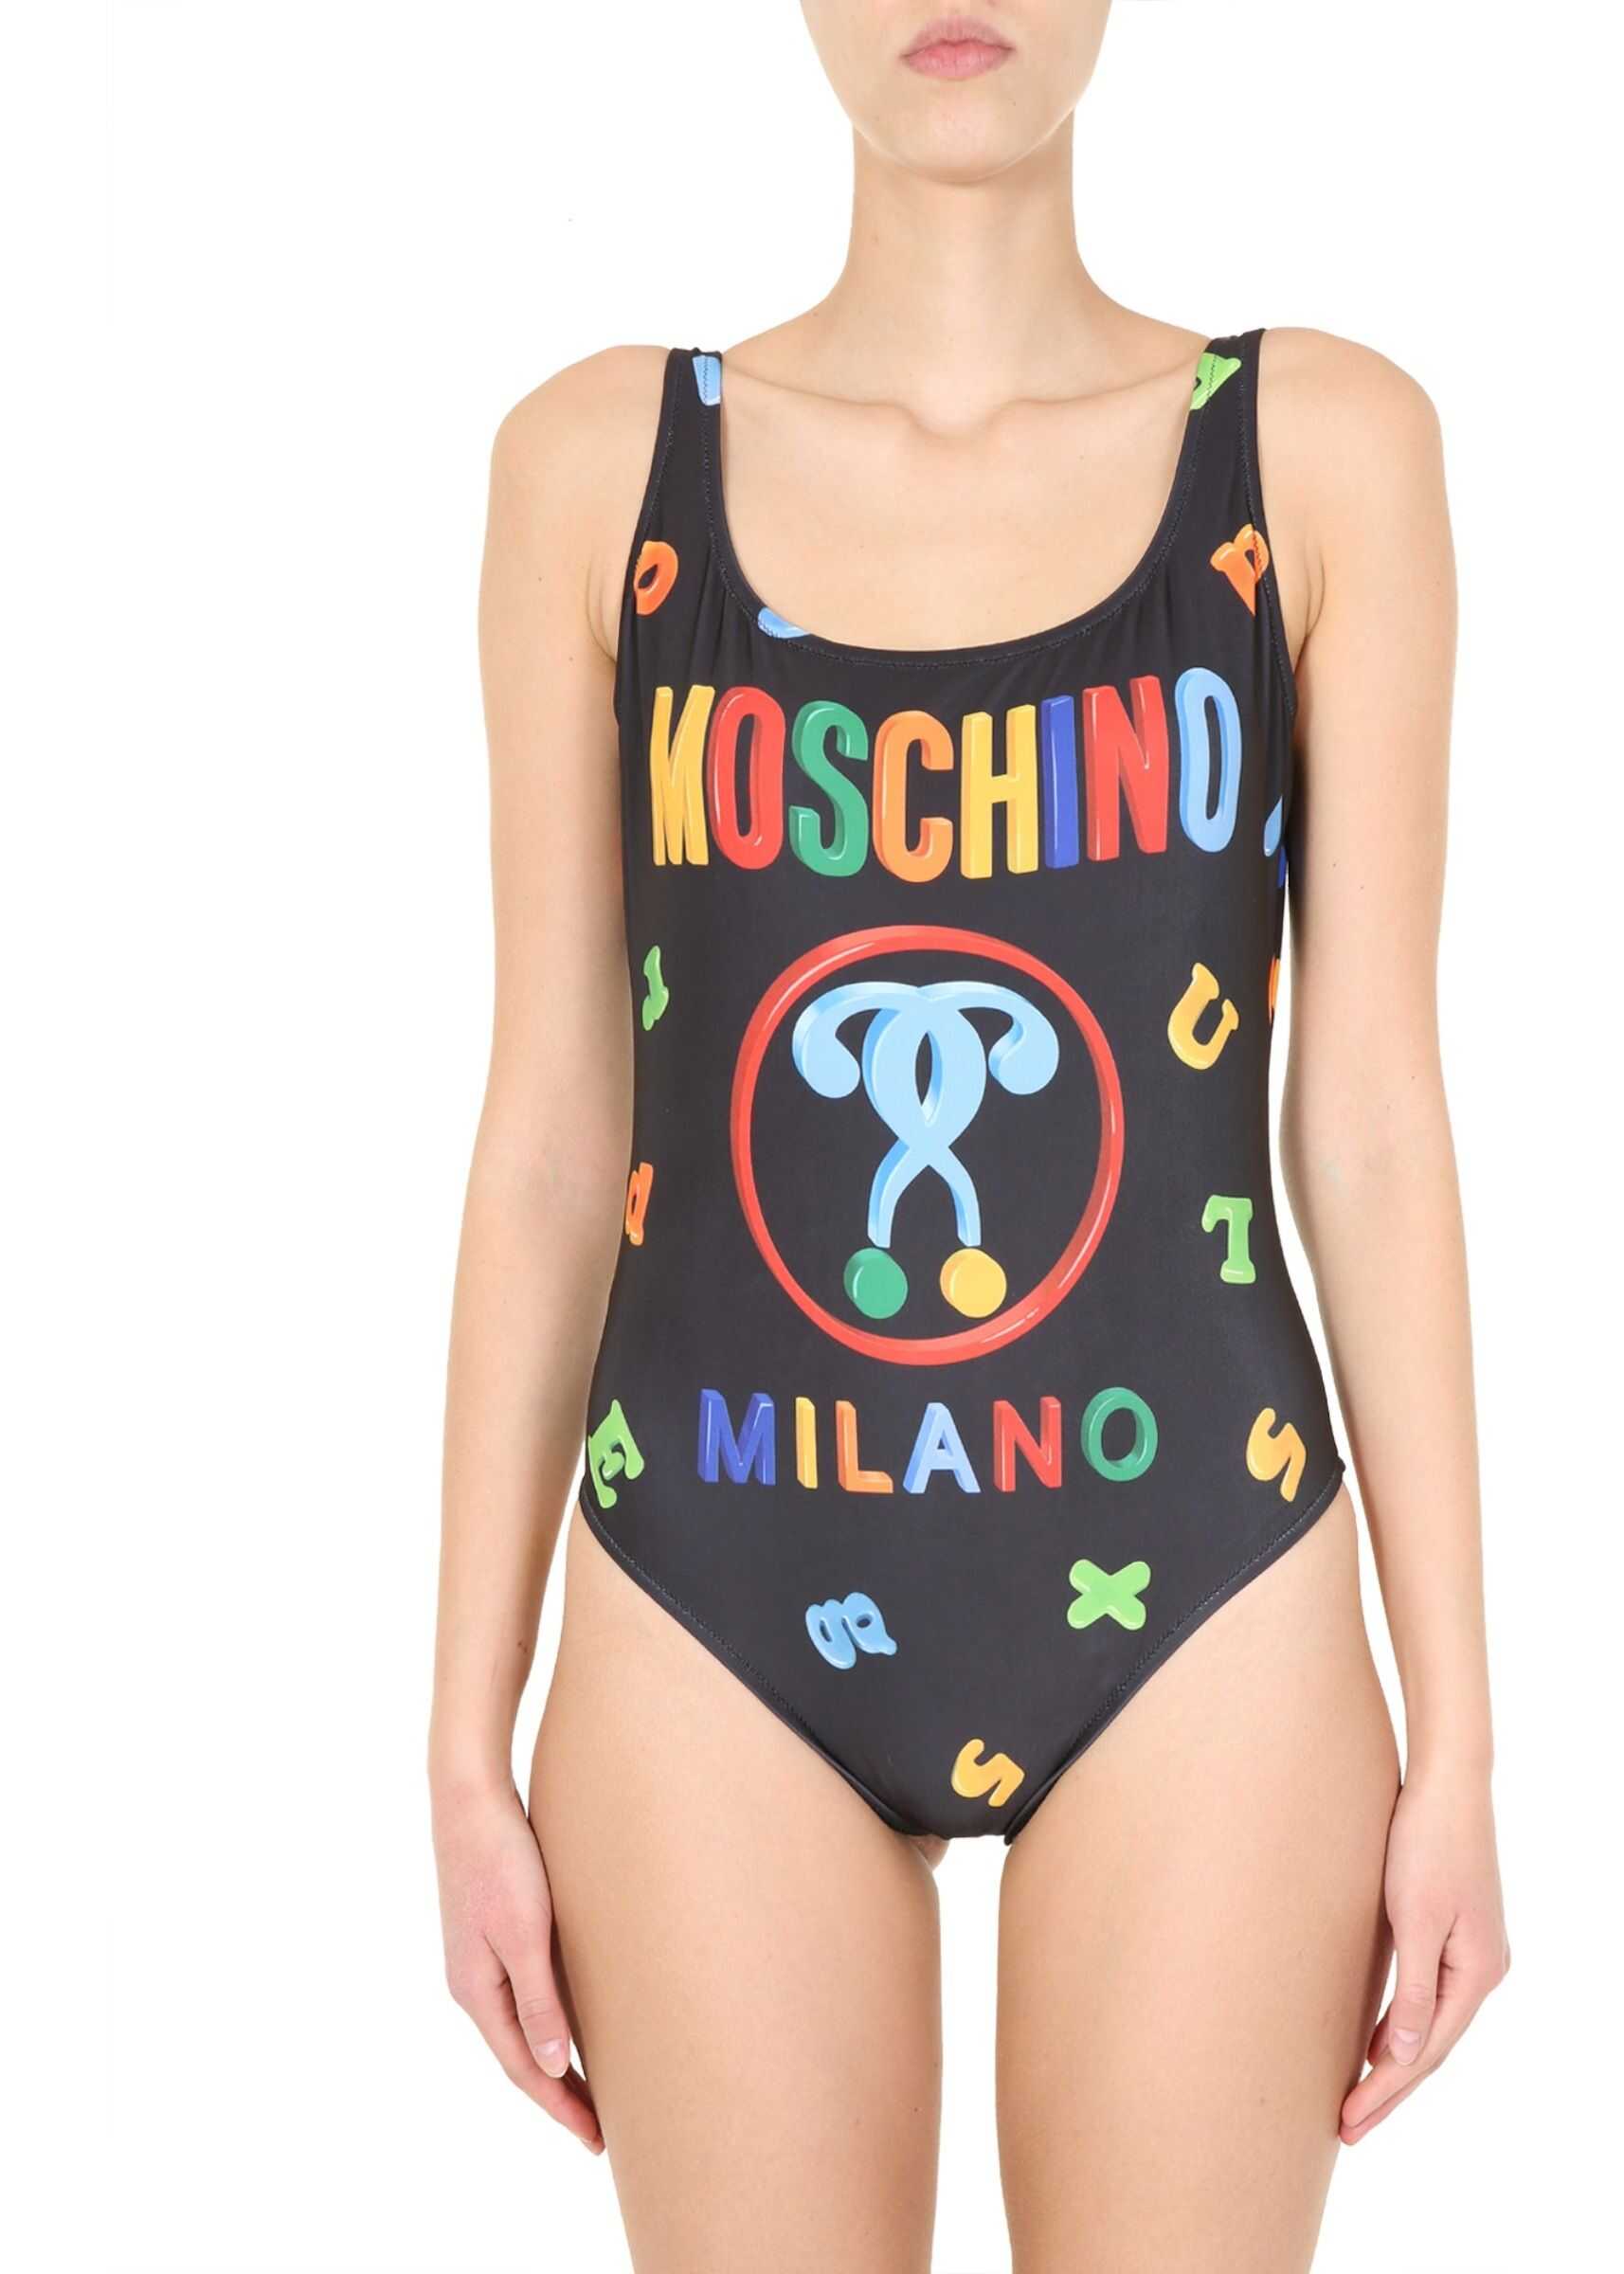 Moschino "Magnets"One-Piece Costume BLACK